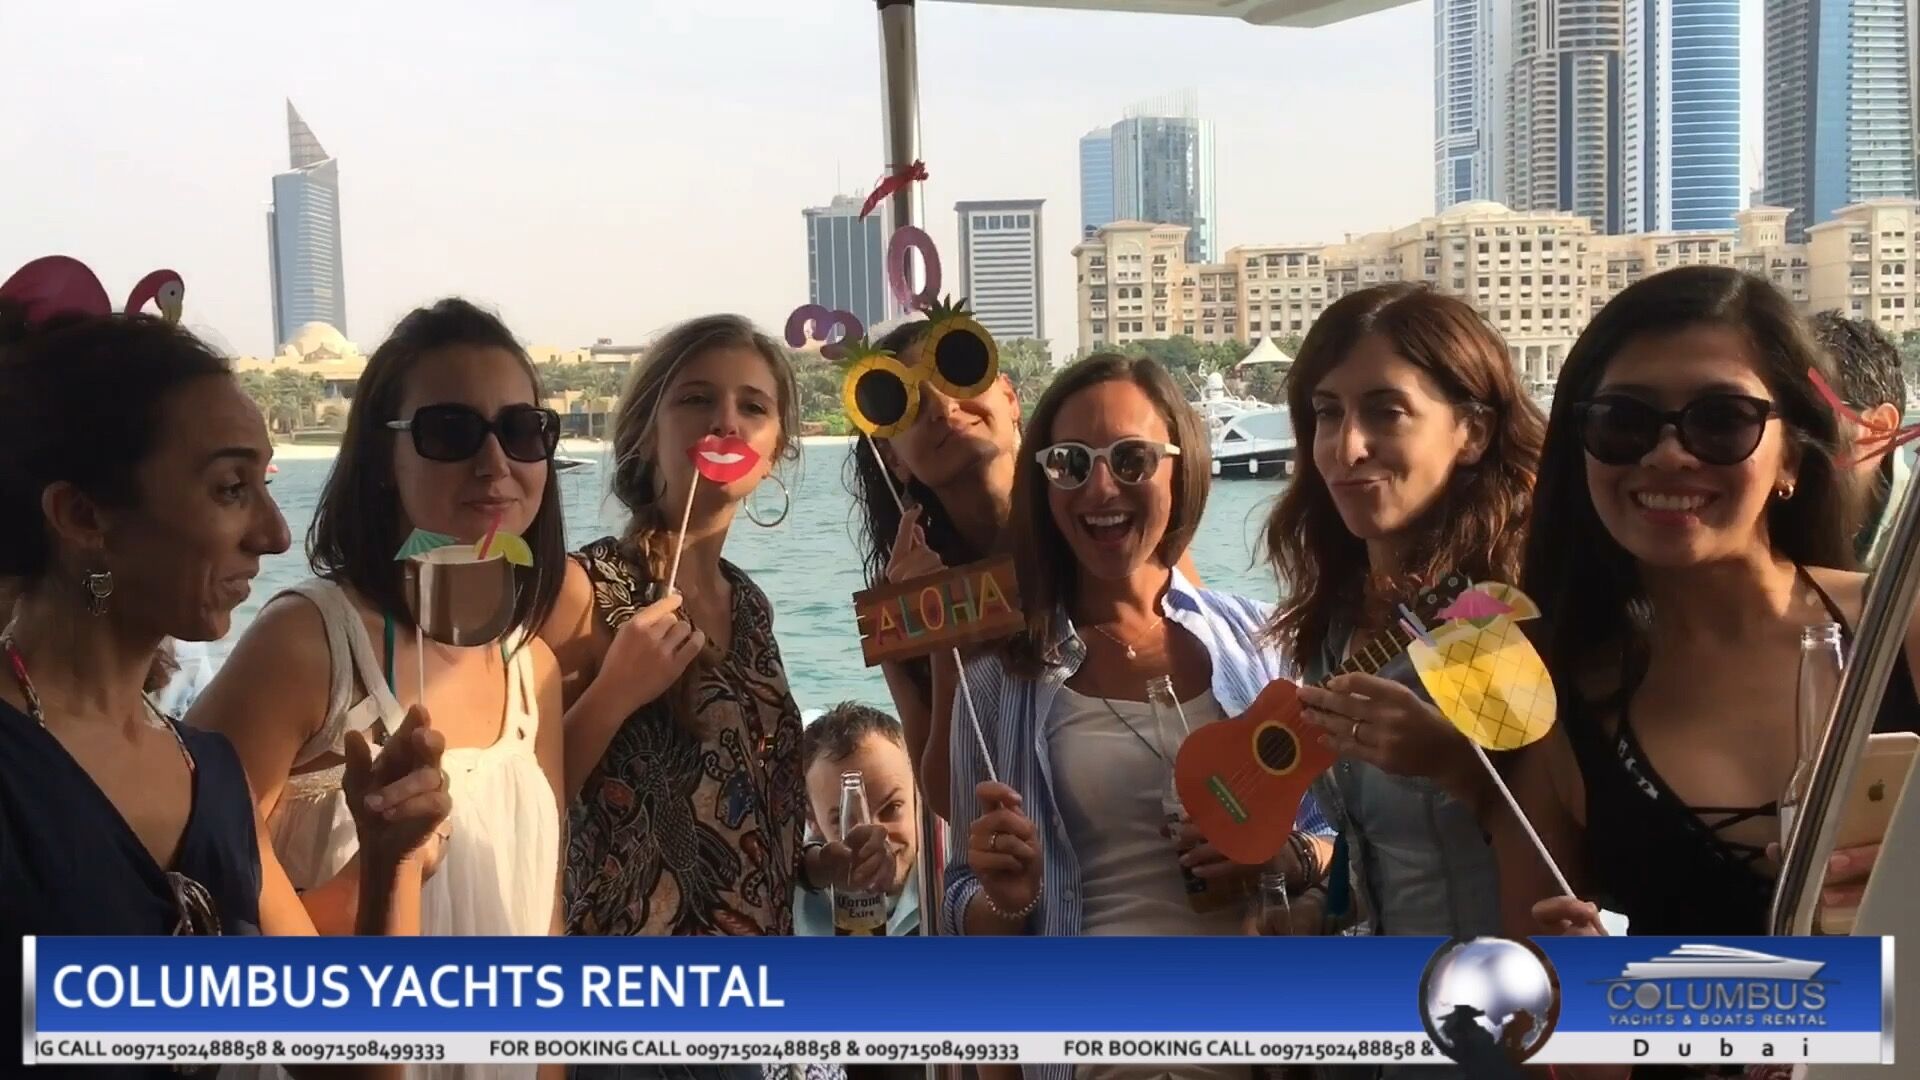 yacht rental for birthday party in dubai boat ideas packages celebrate cruise price _3042